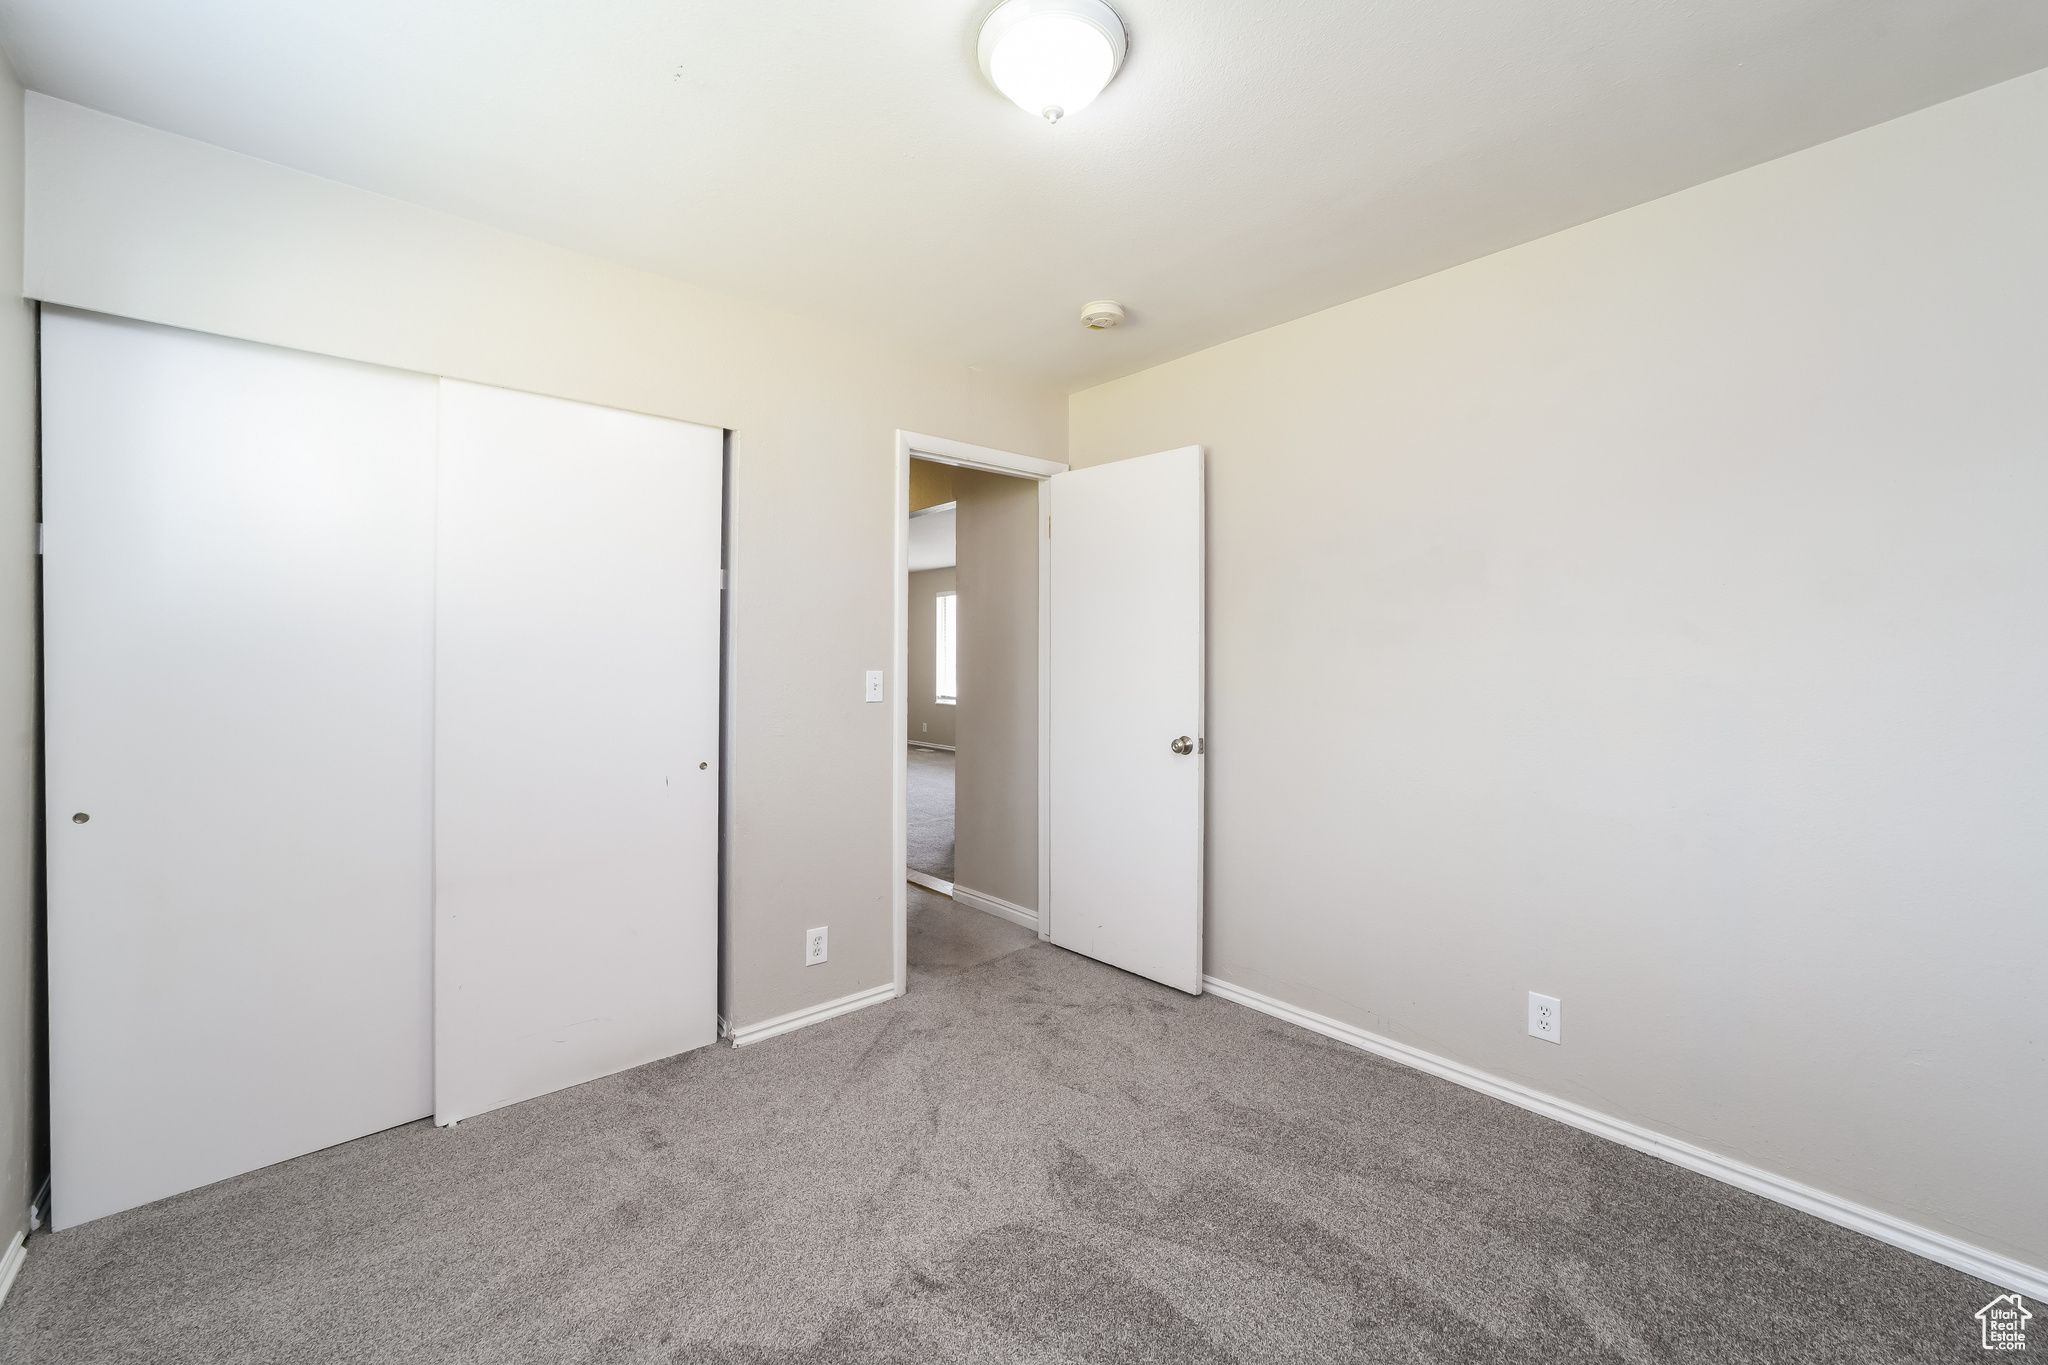 Unfurnished bedroom featuring carpet and a closet